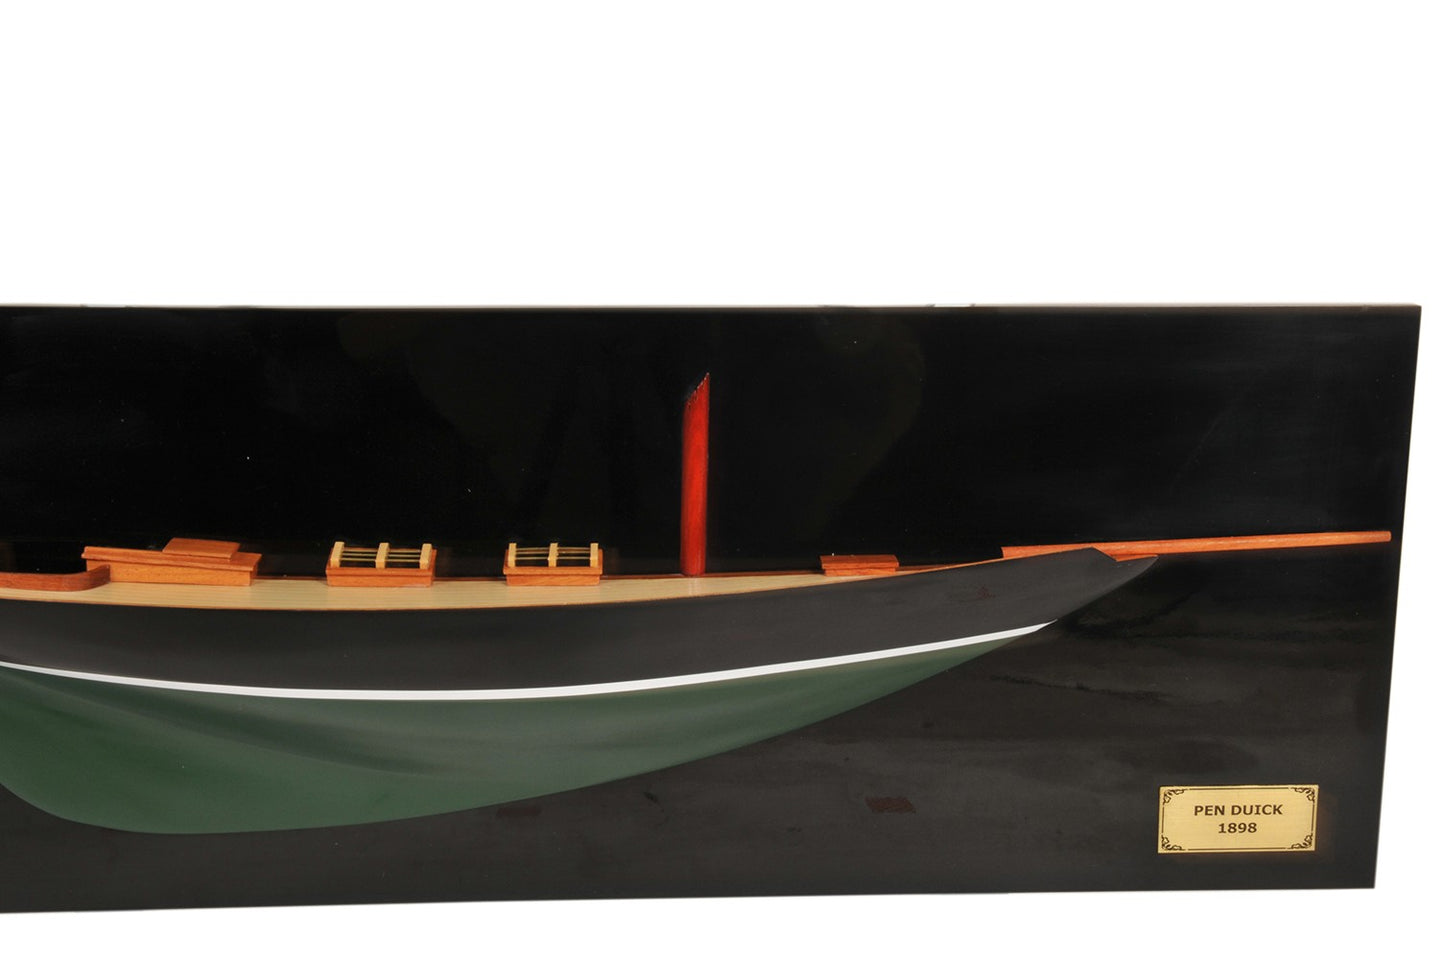 12" Black and Green c1898 Pen Duick Half-Hull Hand Painted Decorative Boat